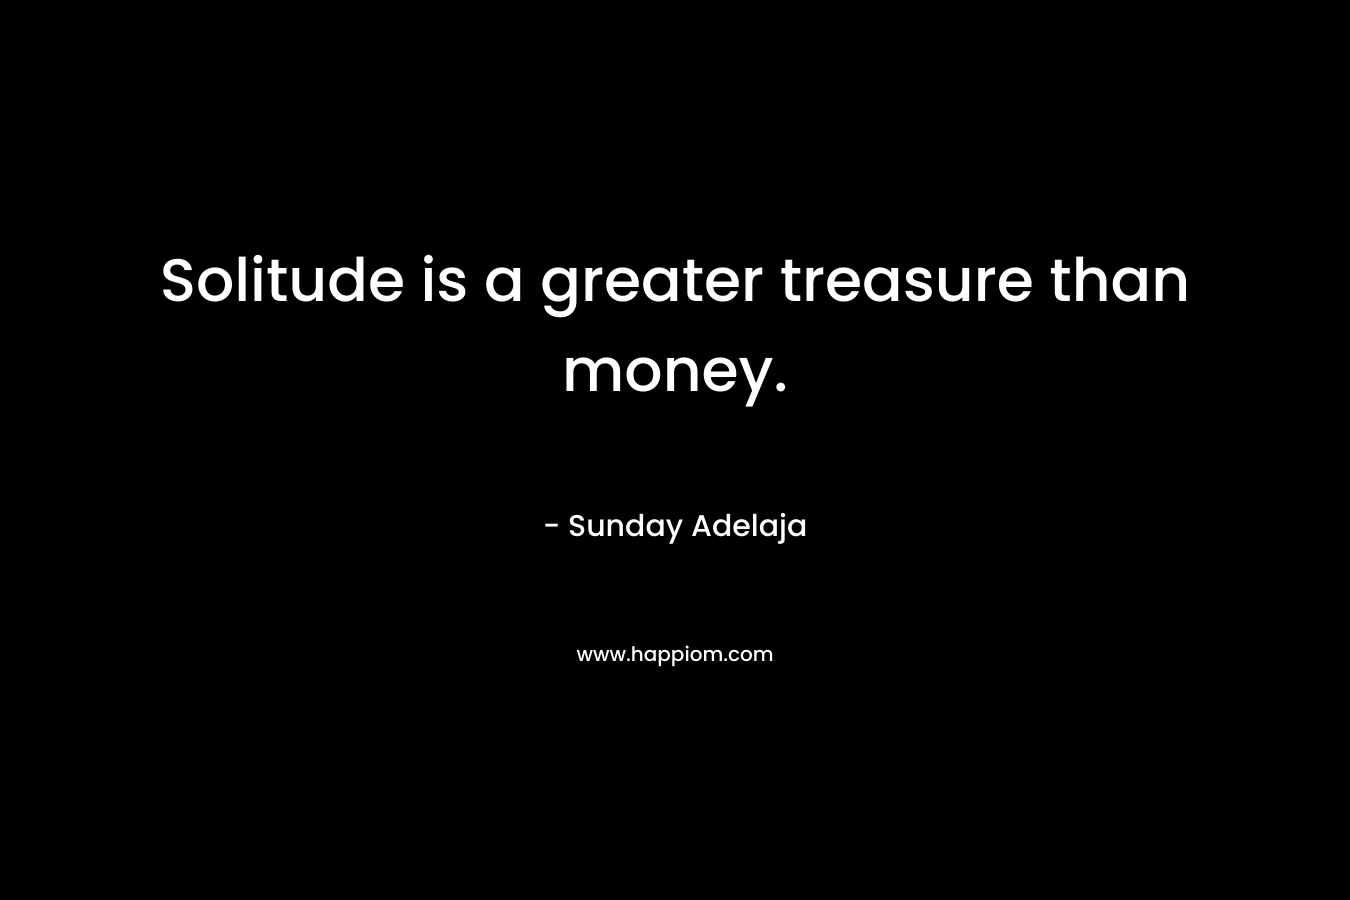 Solitude is a greater treasure than money.